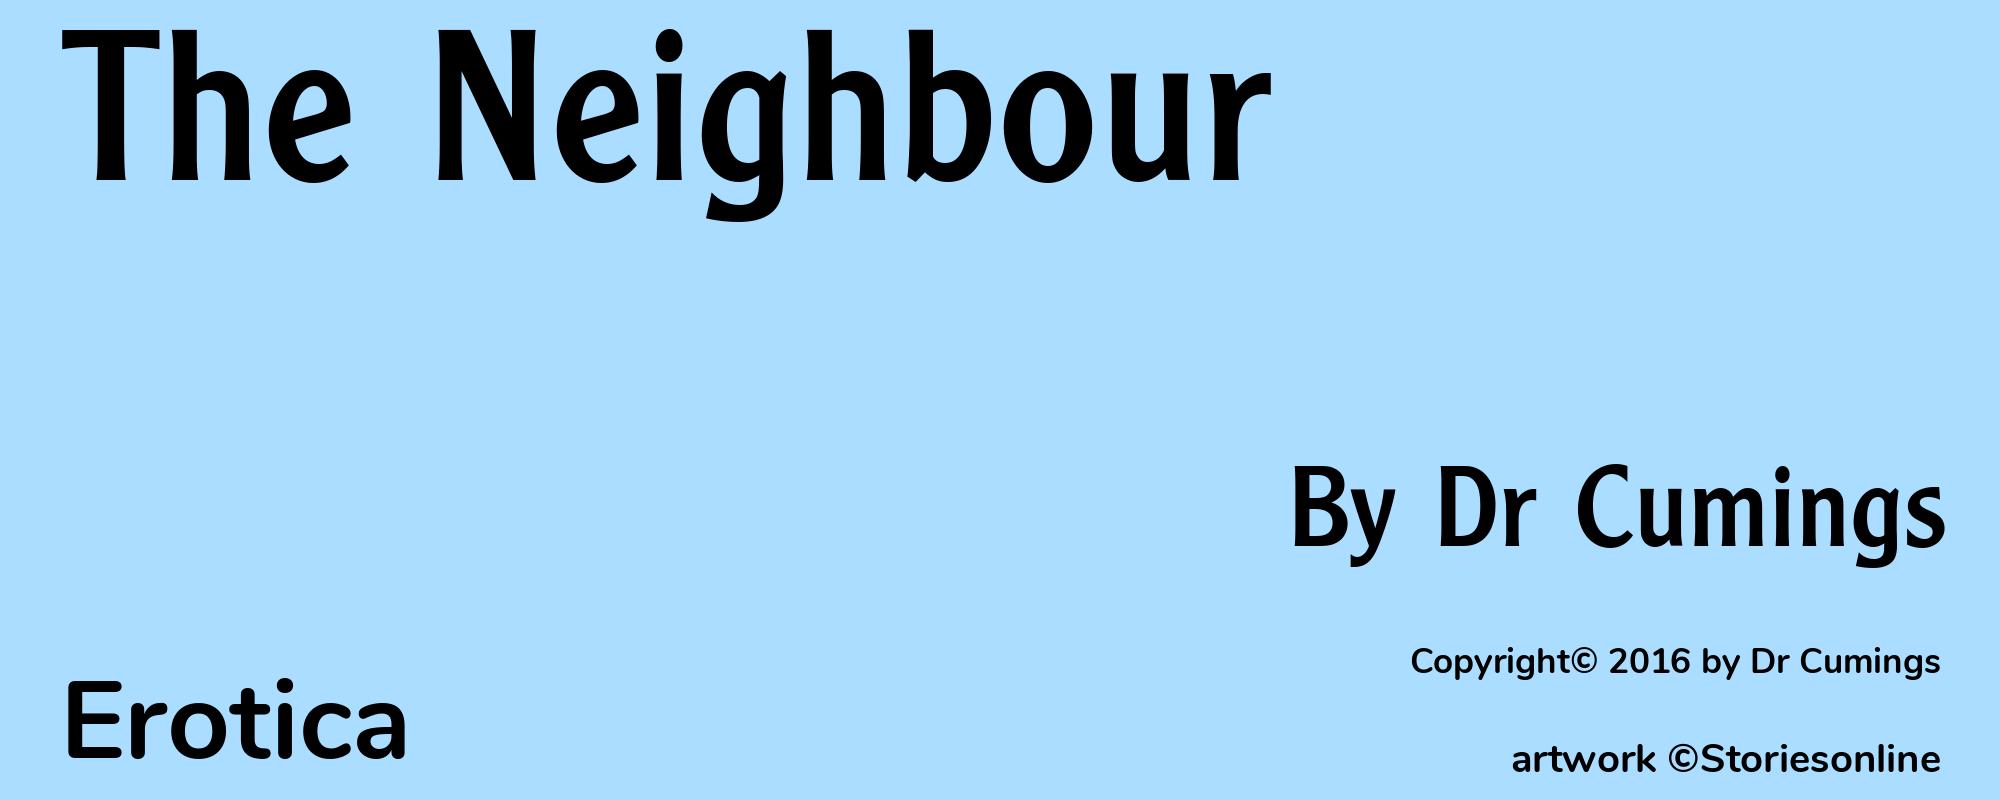 The Neighbour - Cover